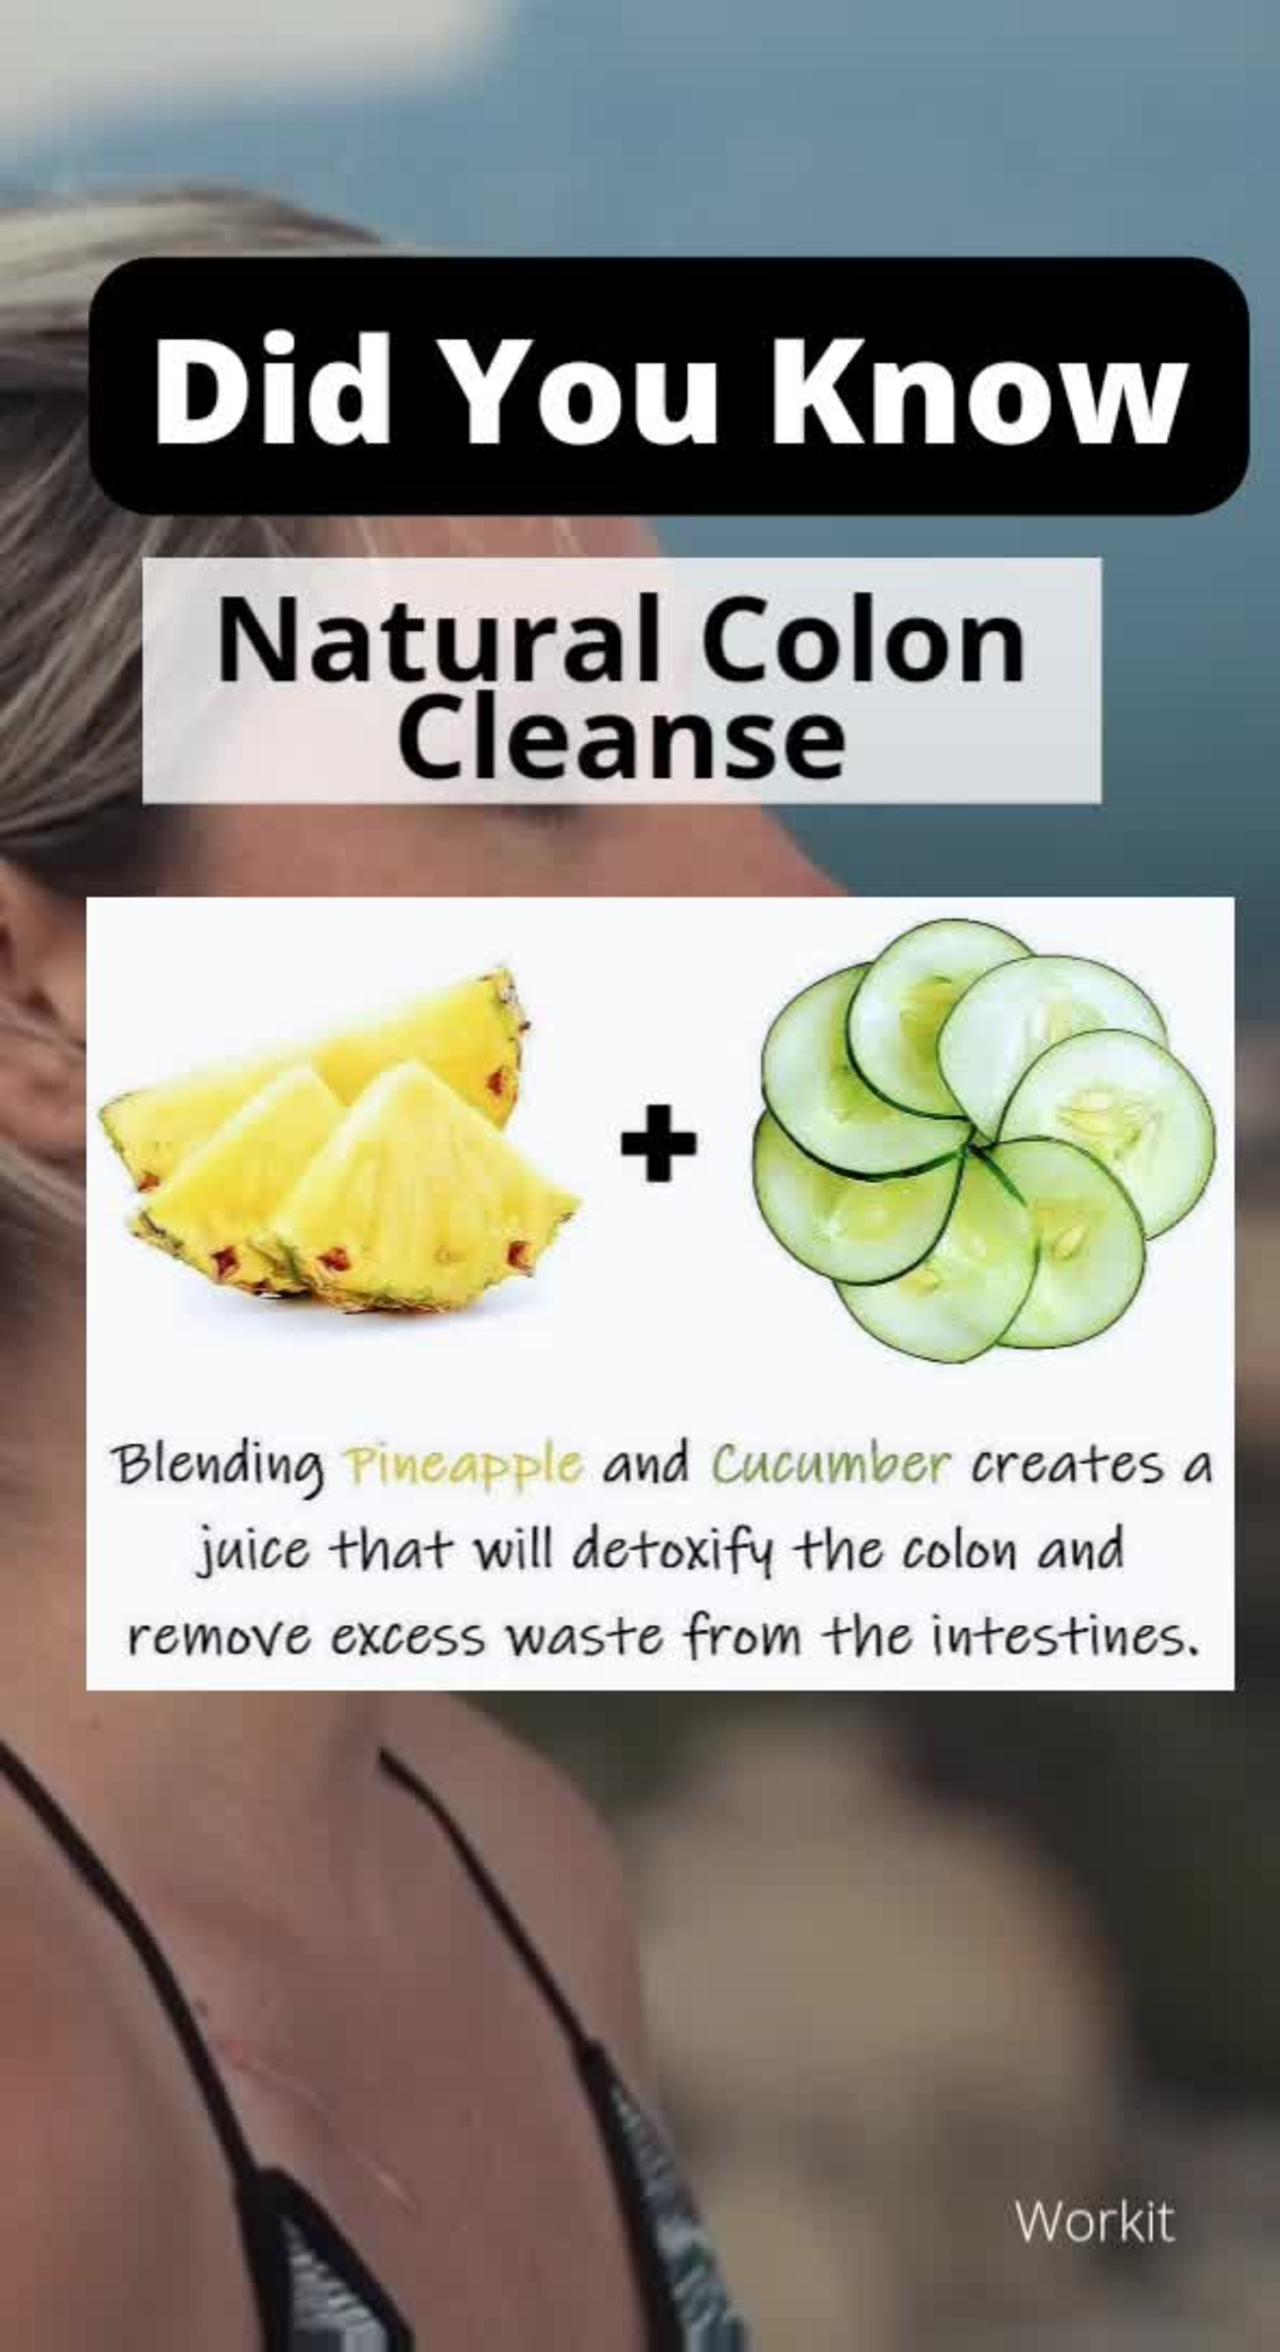 Natural Colon Cleansing.